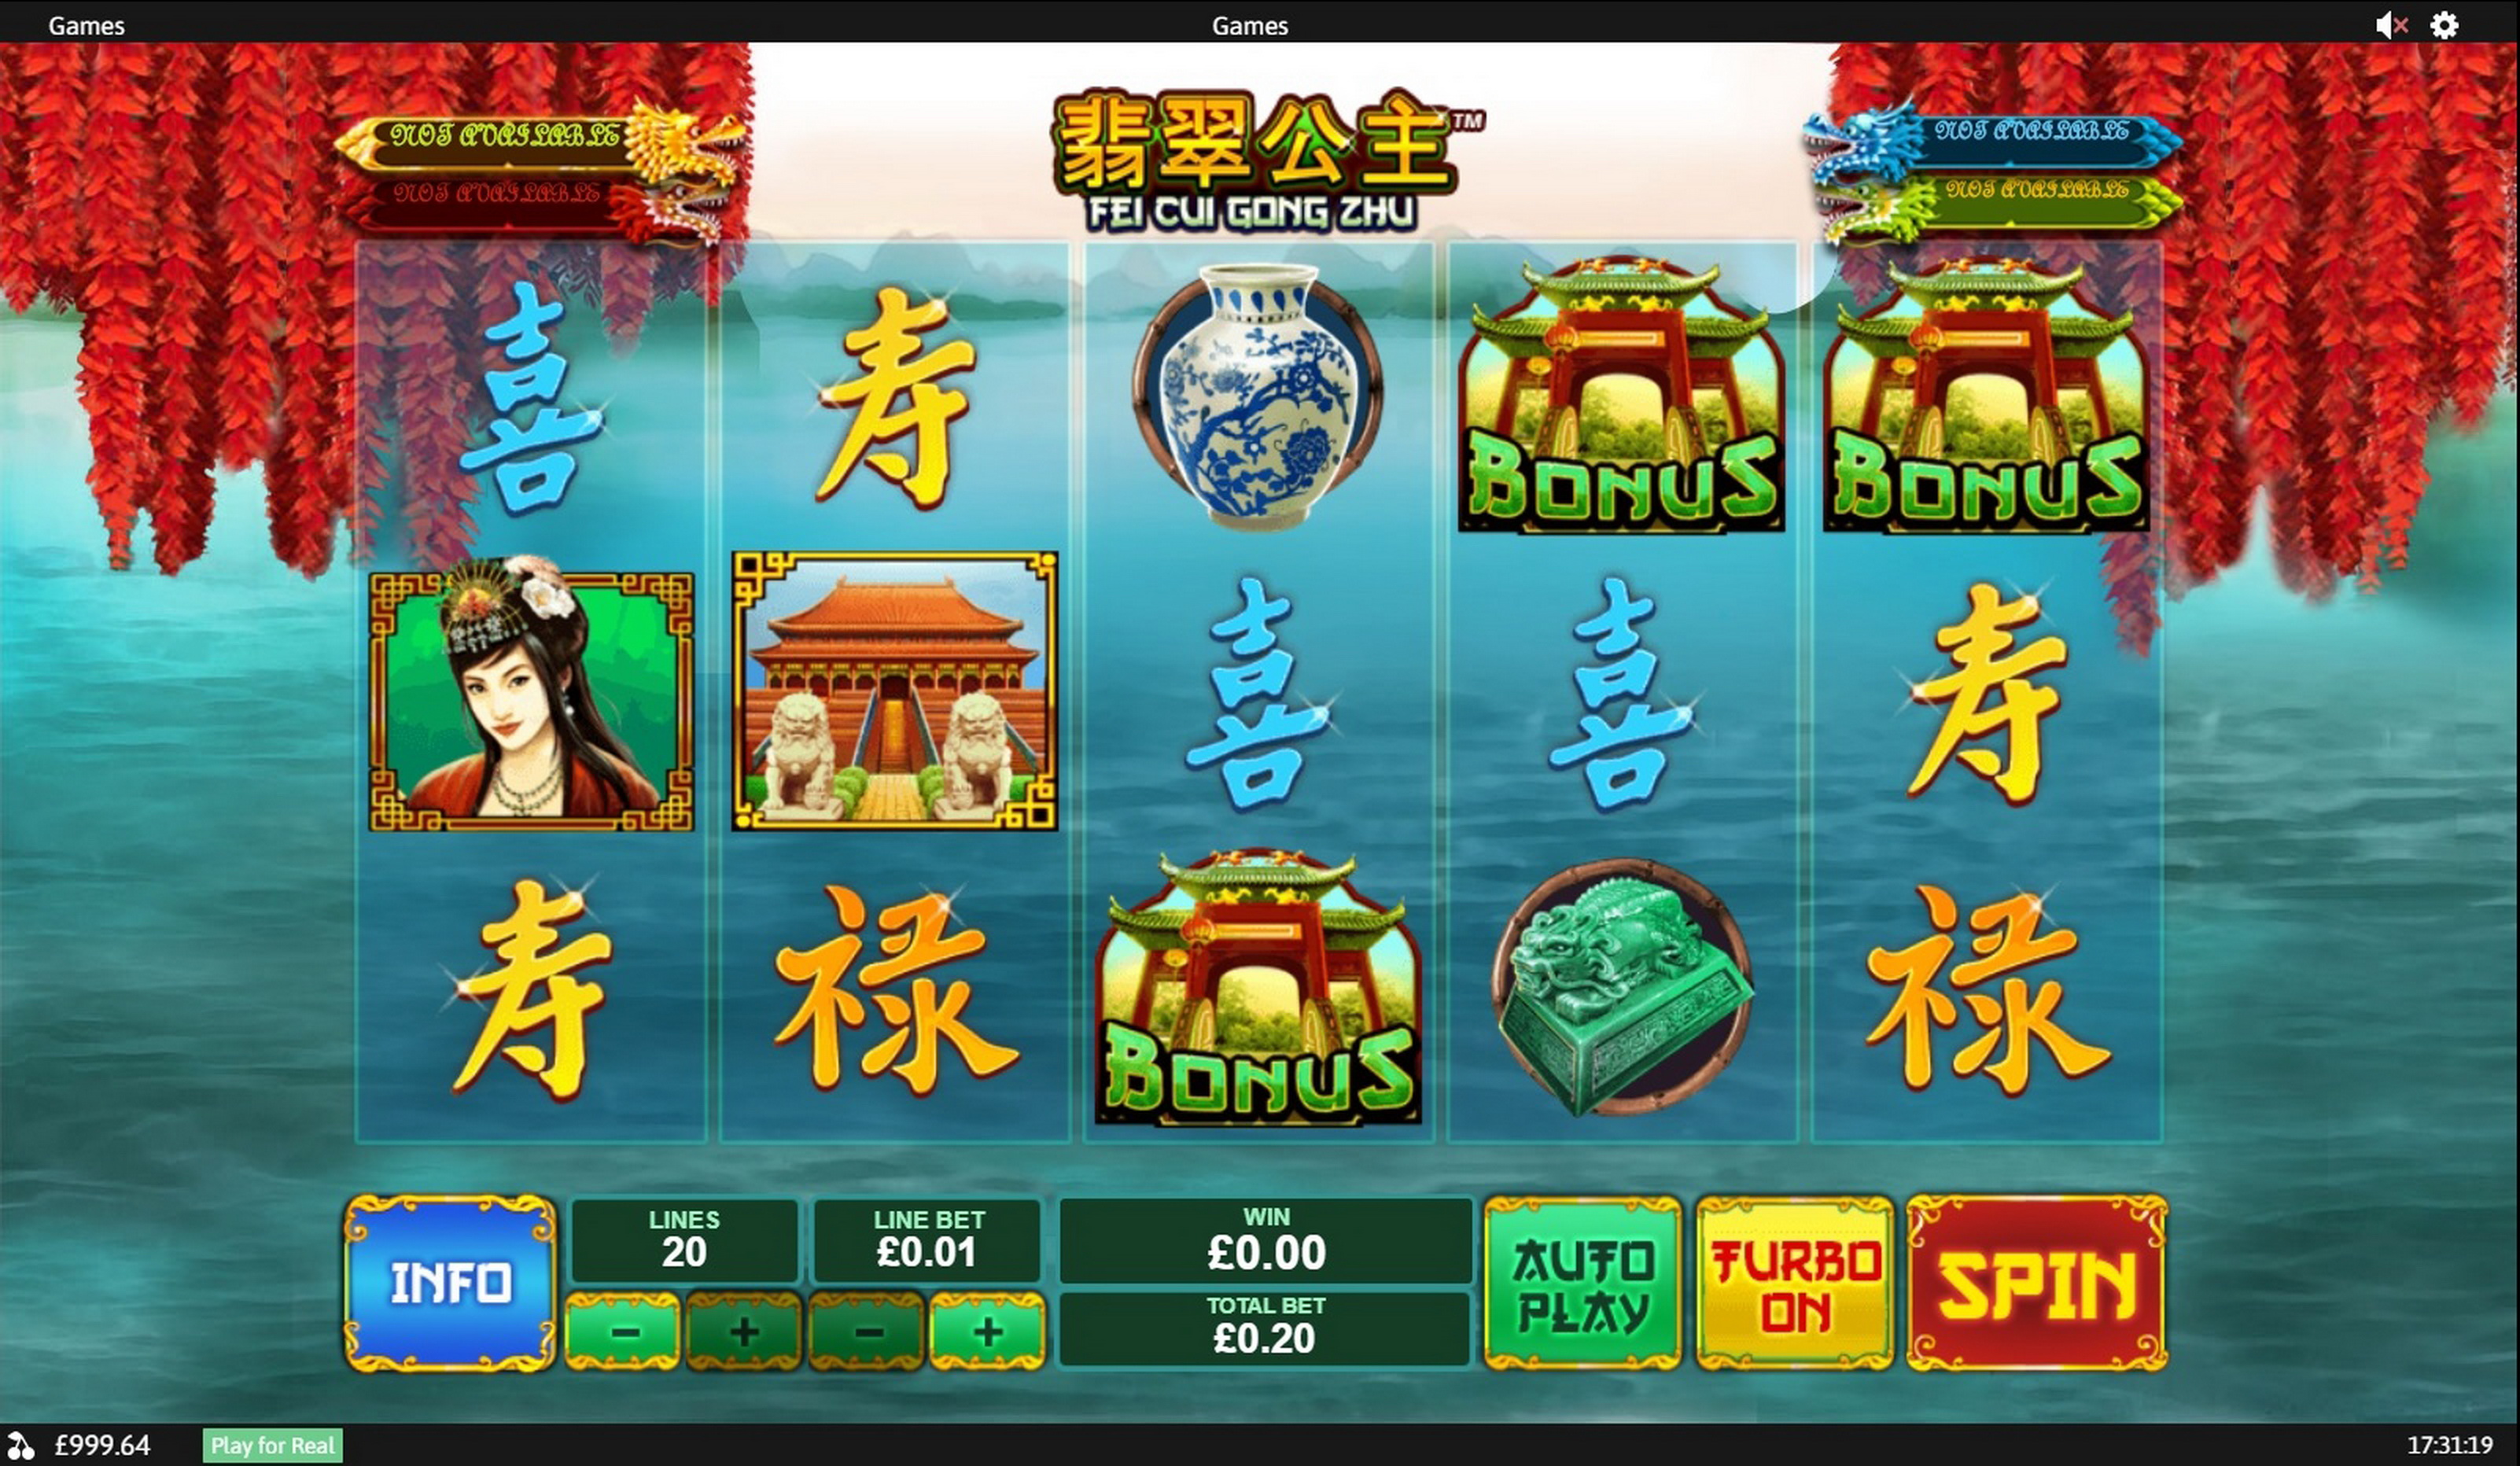 Reels in Fei Cui Gong Zhu Slot Game by Playtech